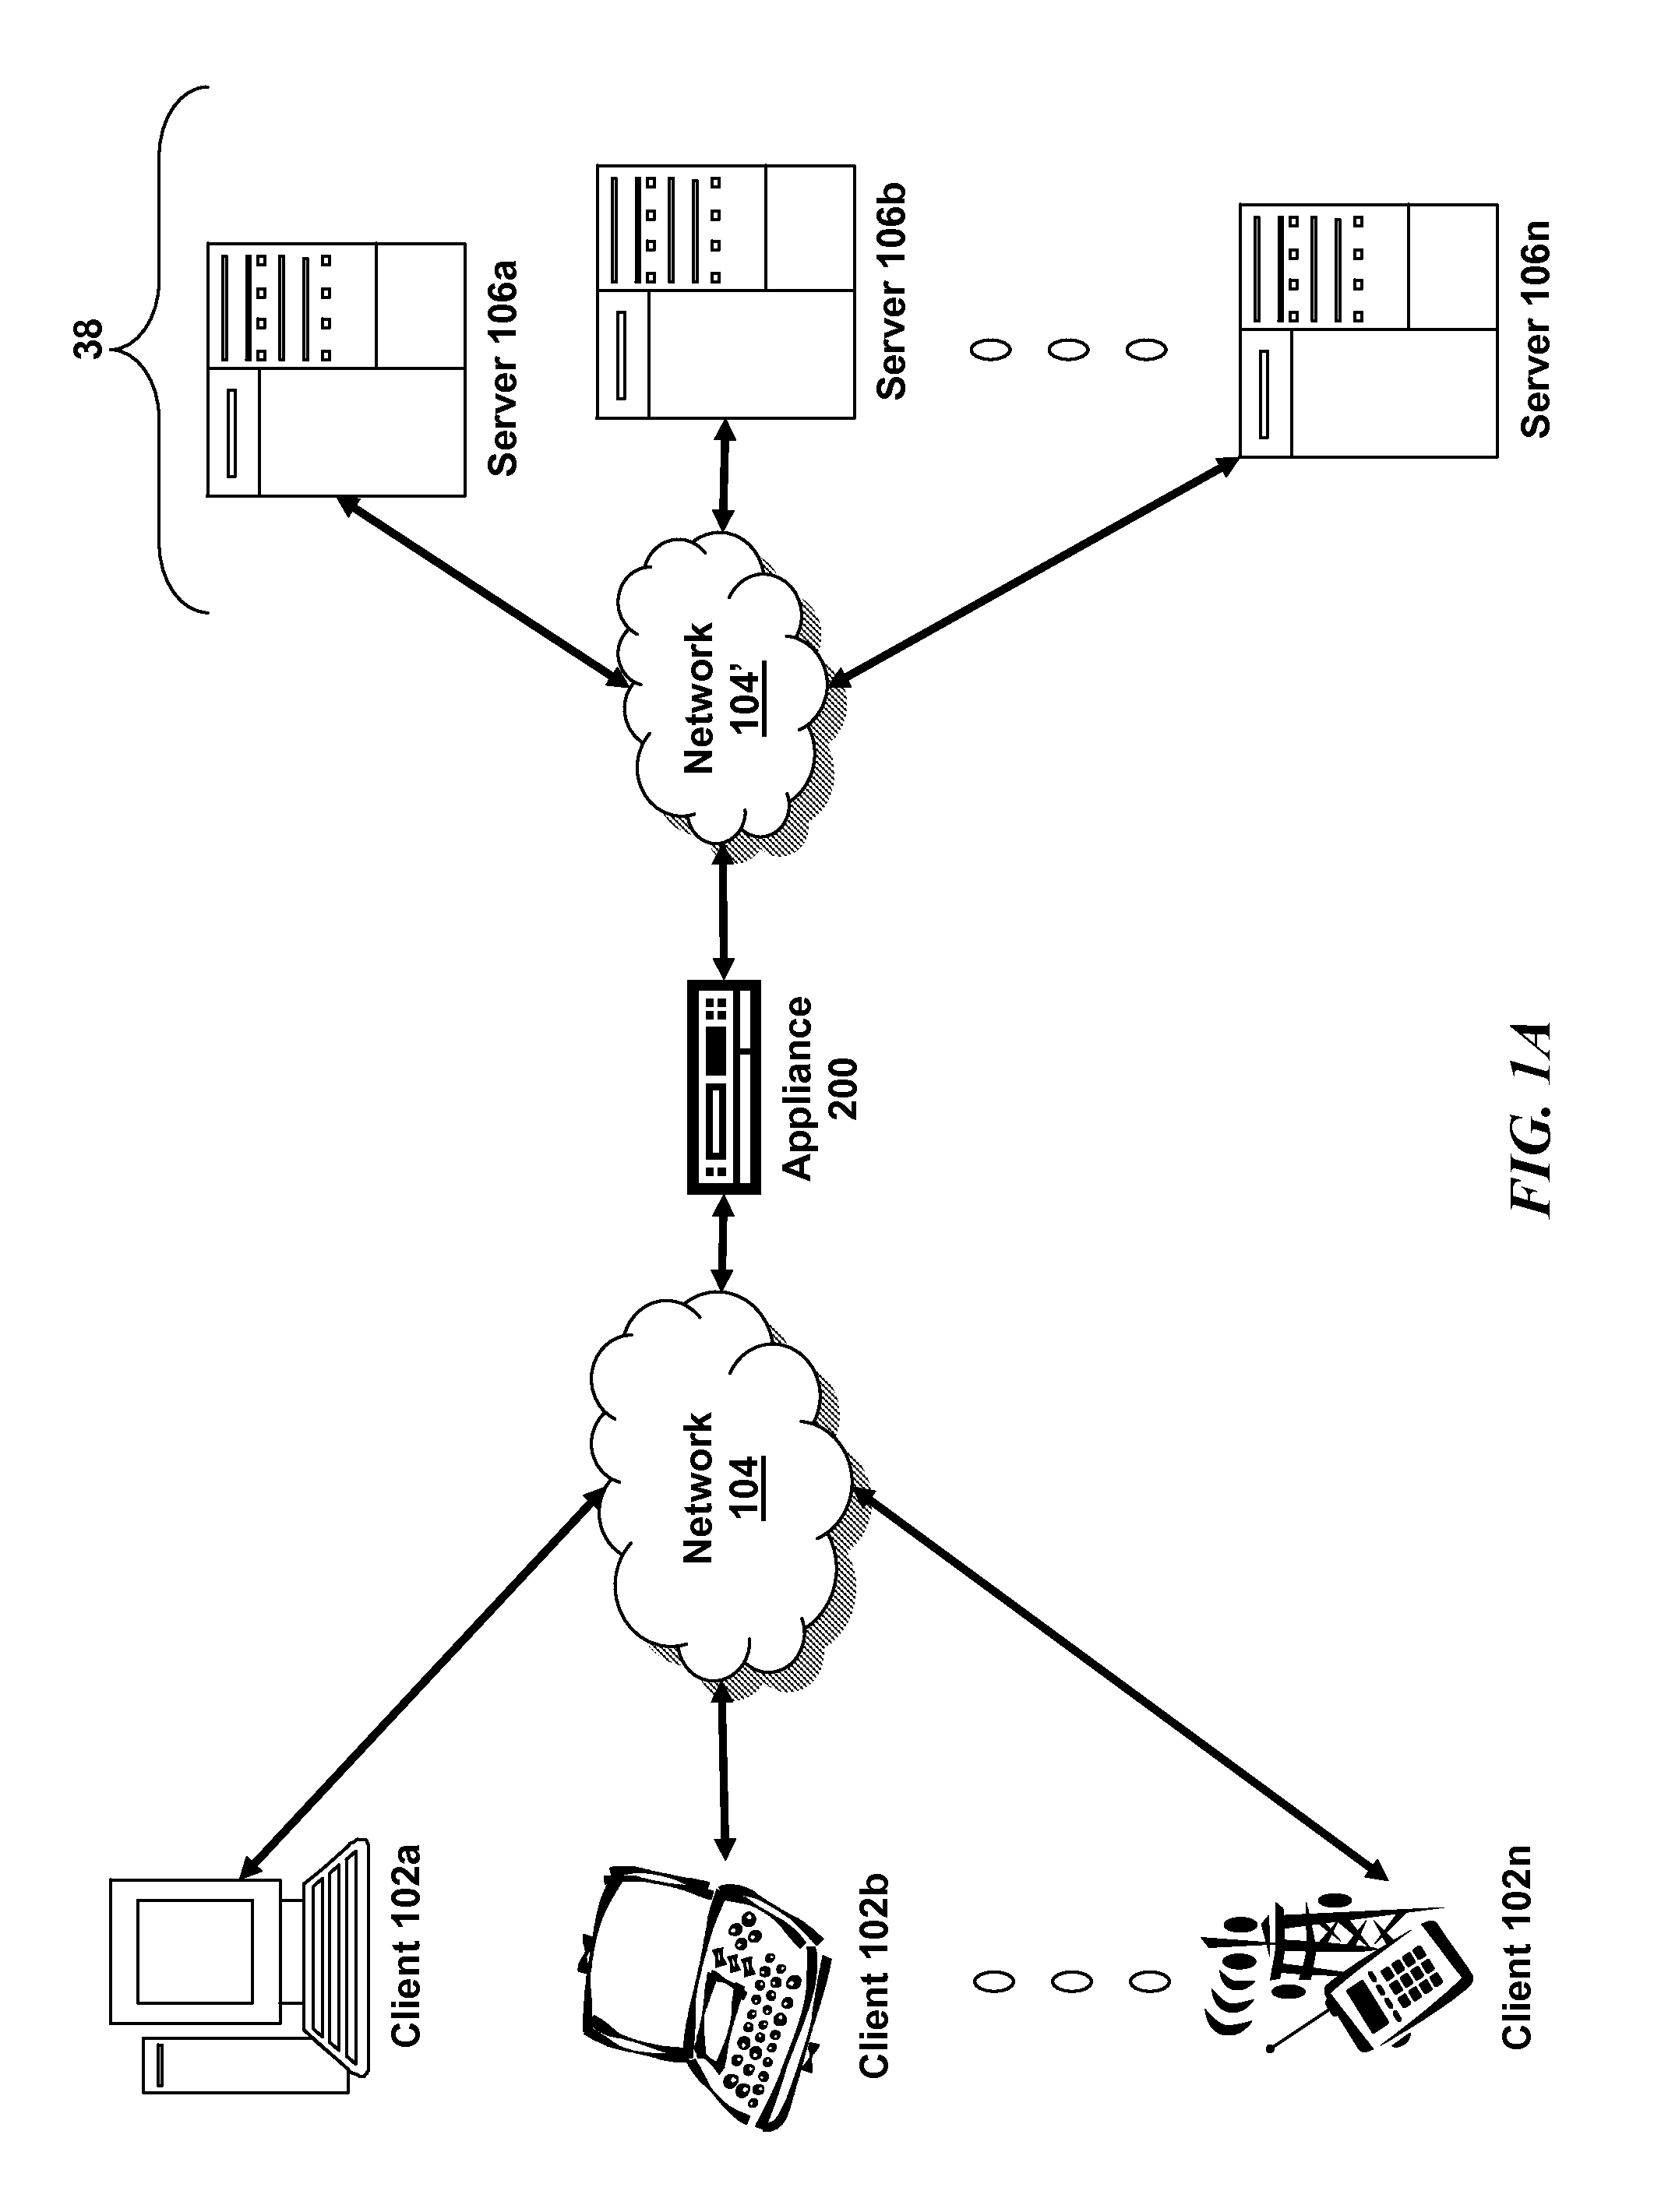 Systems and methods to secure a virtual appliance